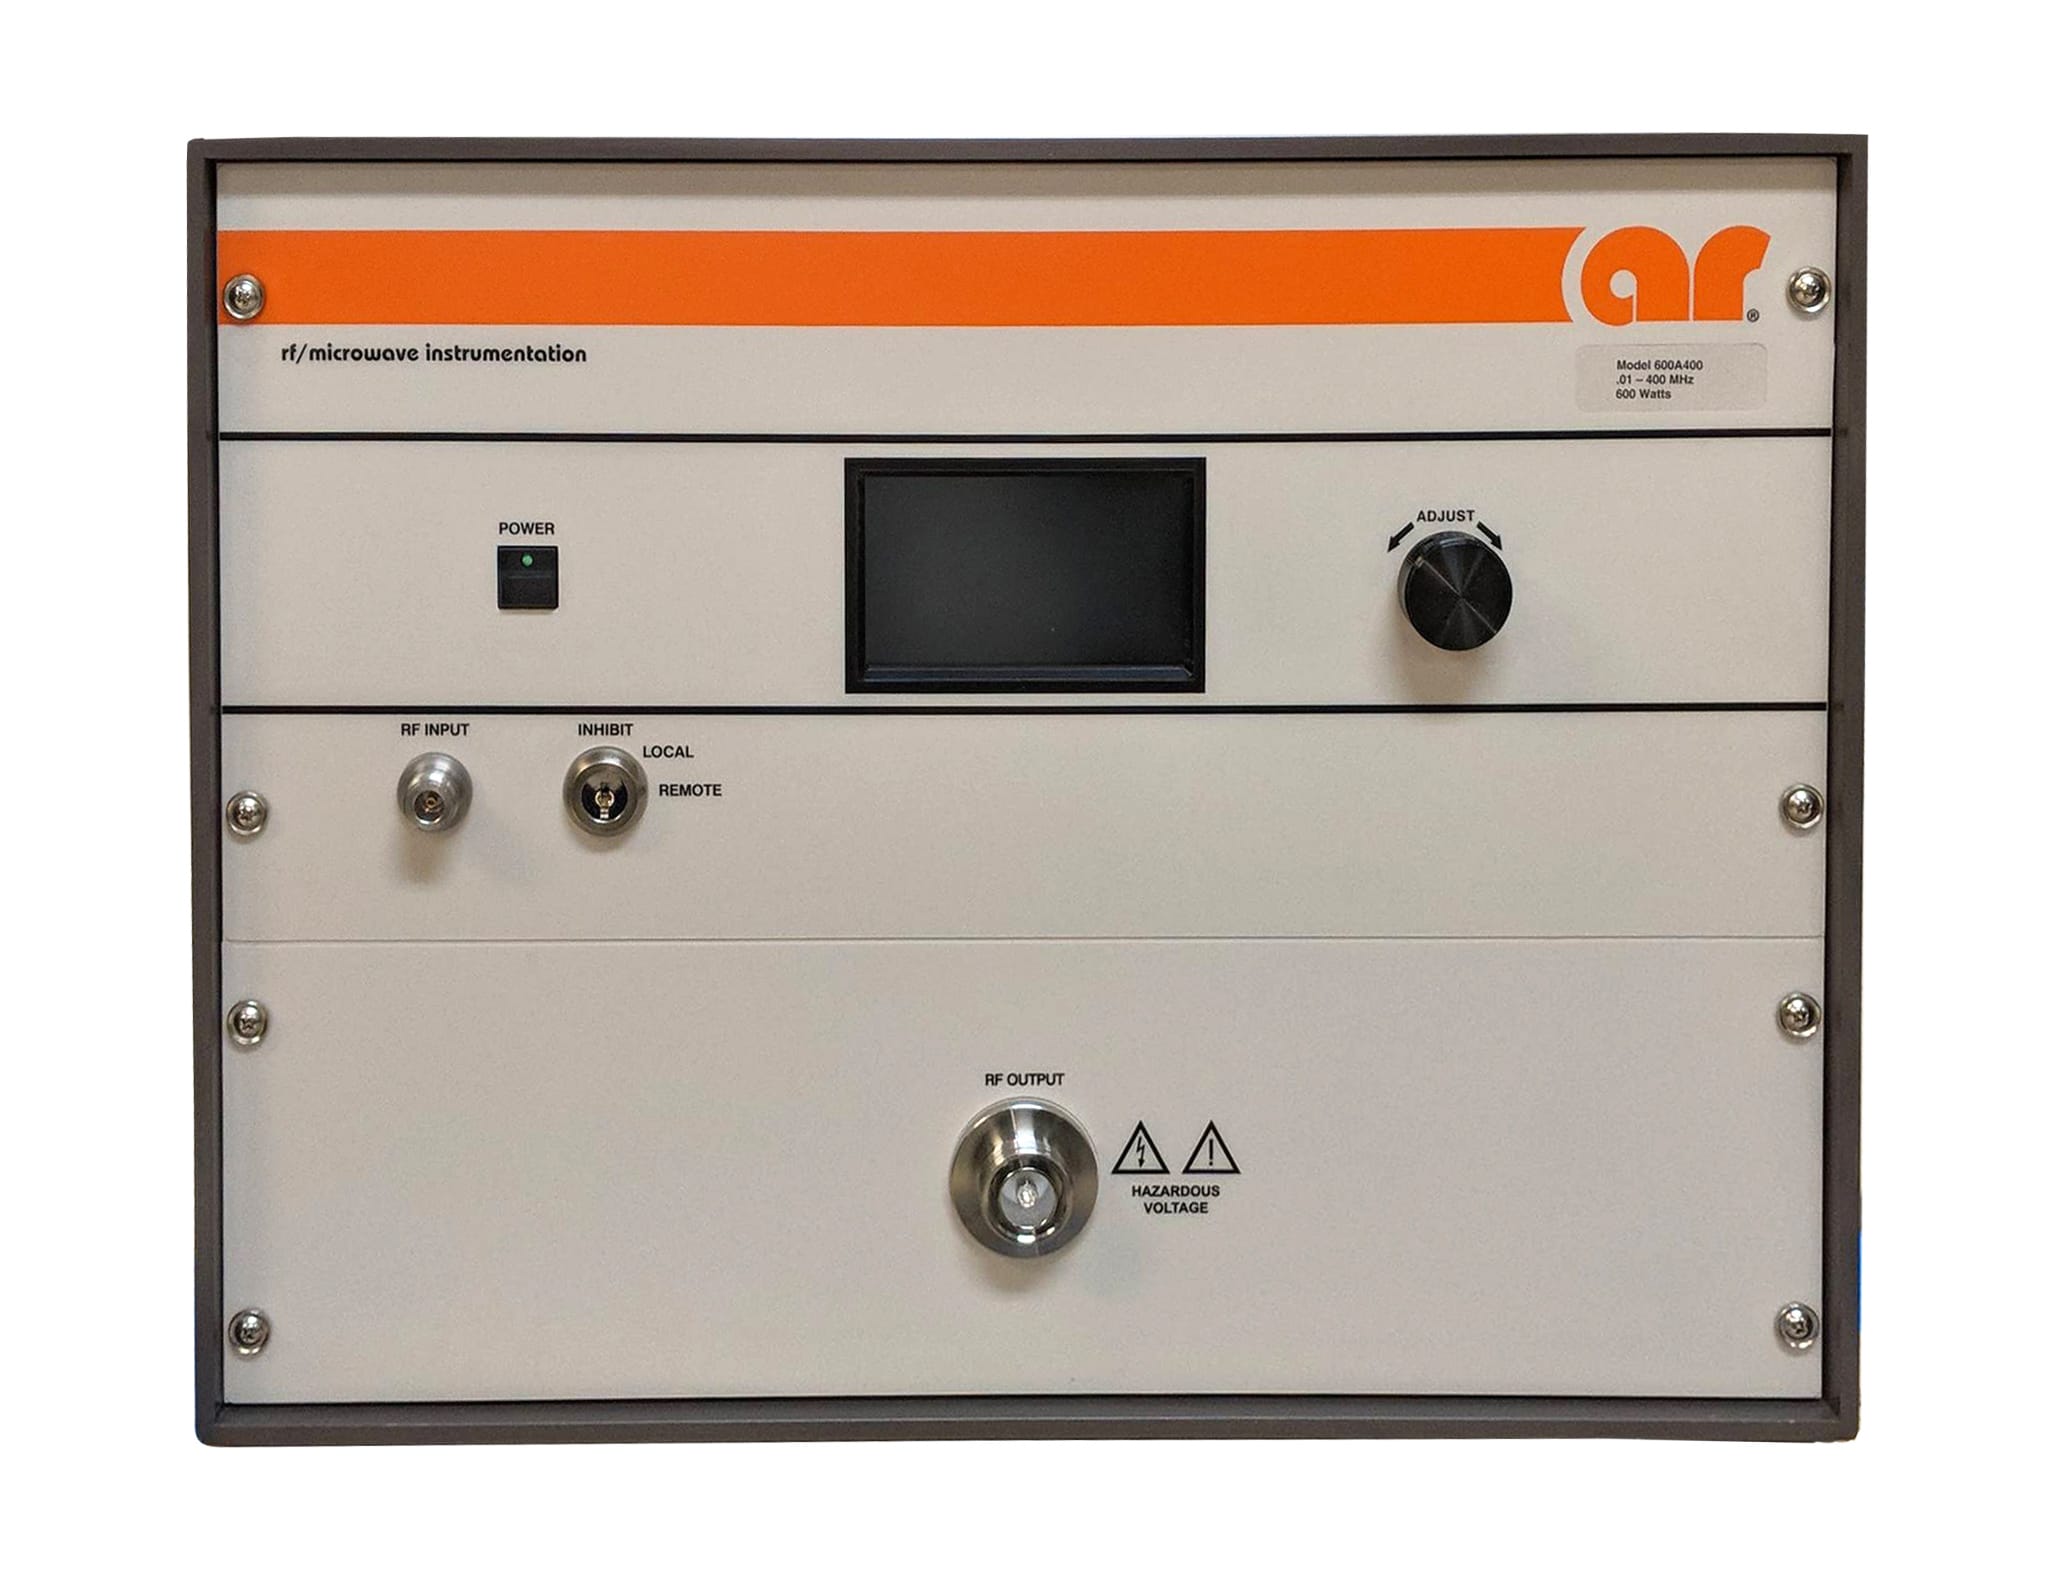 Amplifier Research 600A400 CW Solid State RF Amplifier | 10 kHz to 400 MHz, 600 W